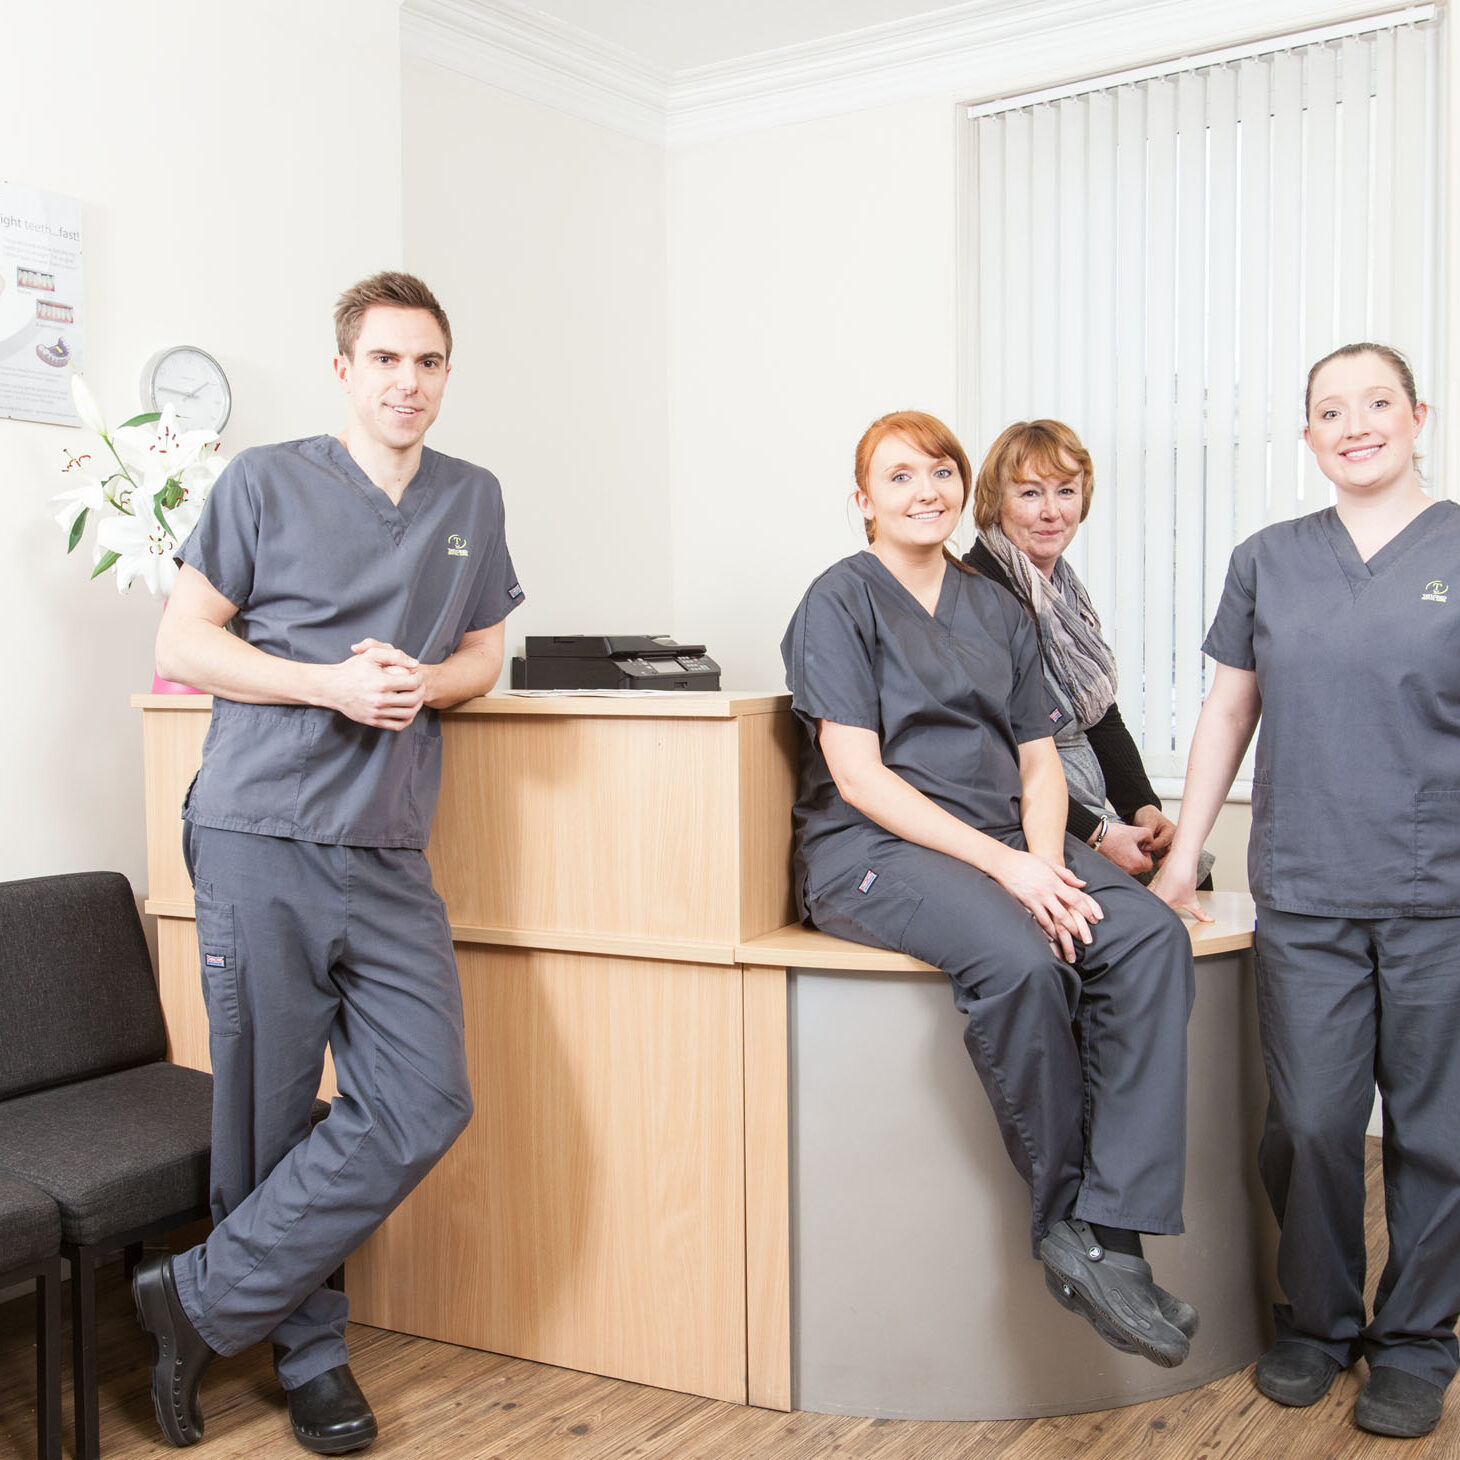 Keighley_Staff_Taylored_Dental_Care